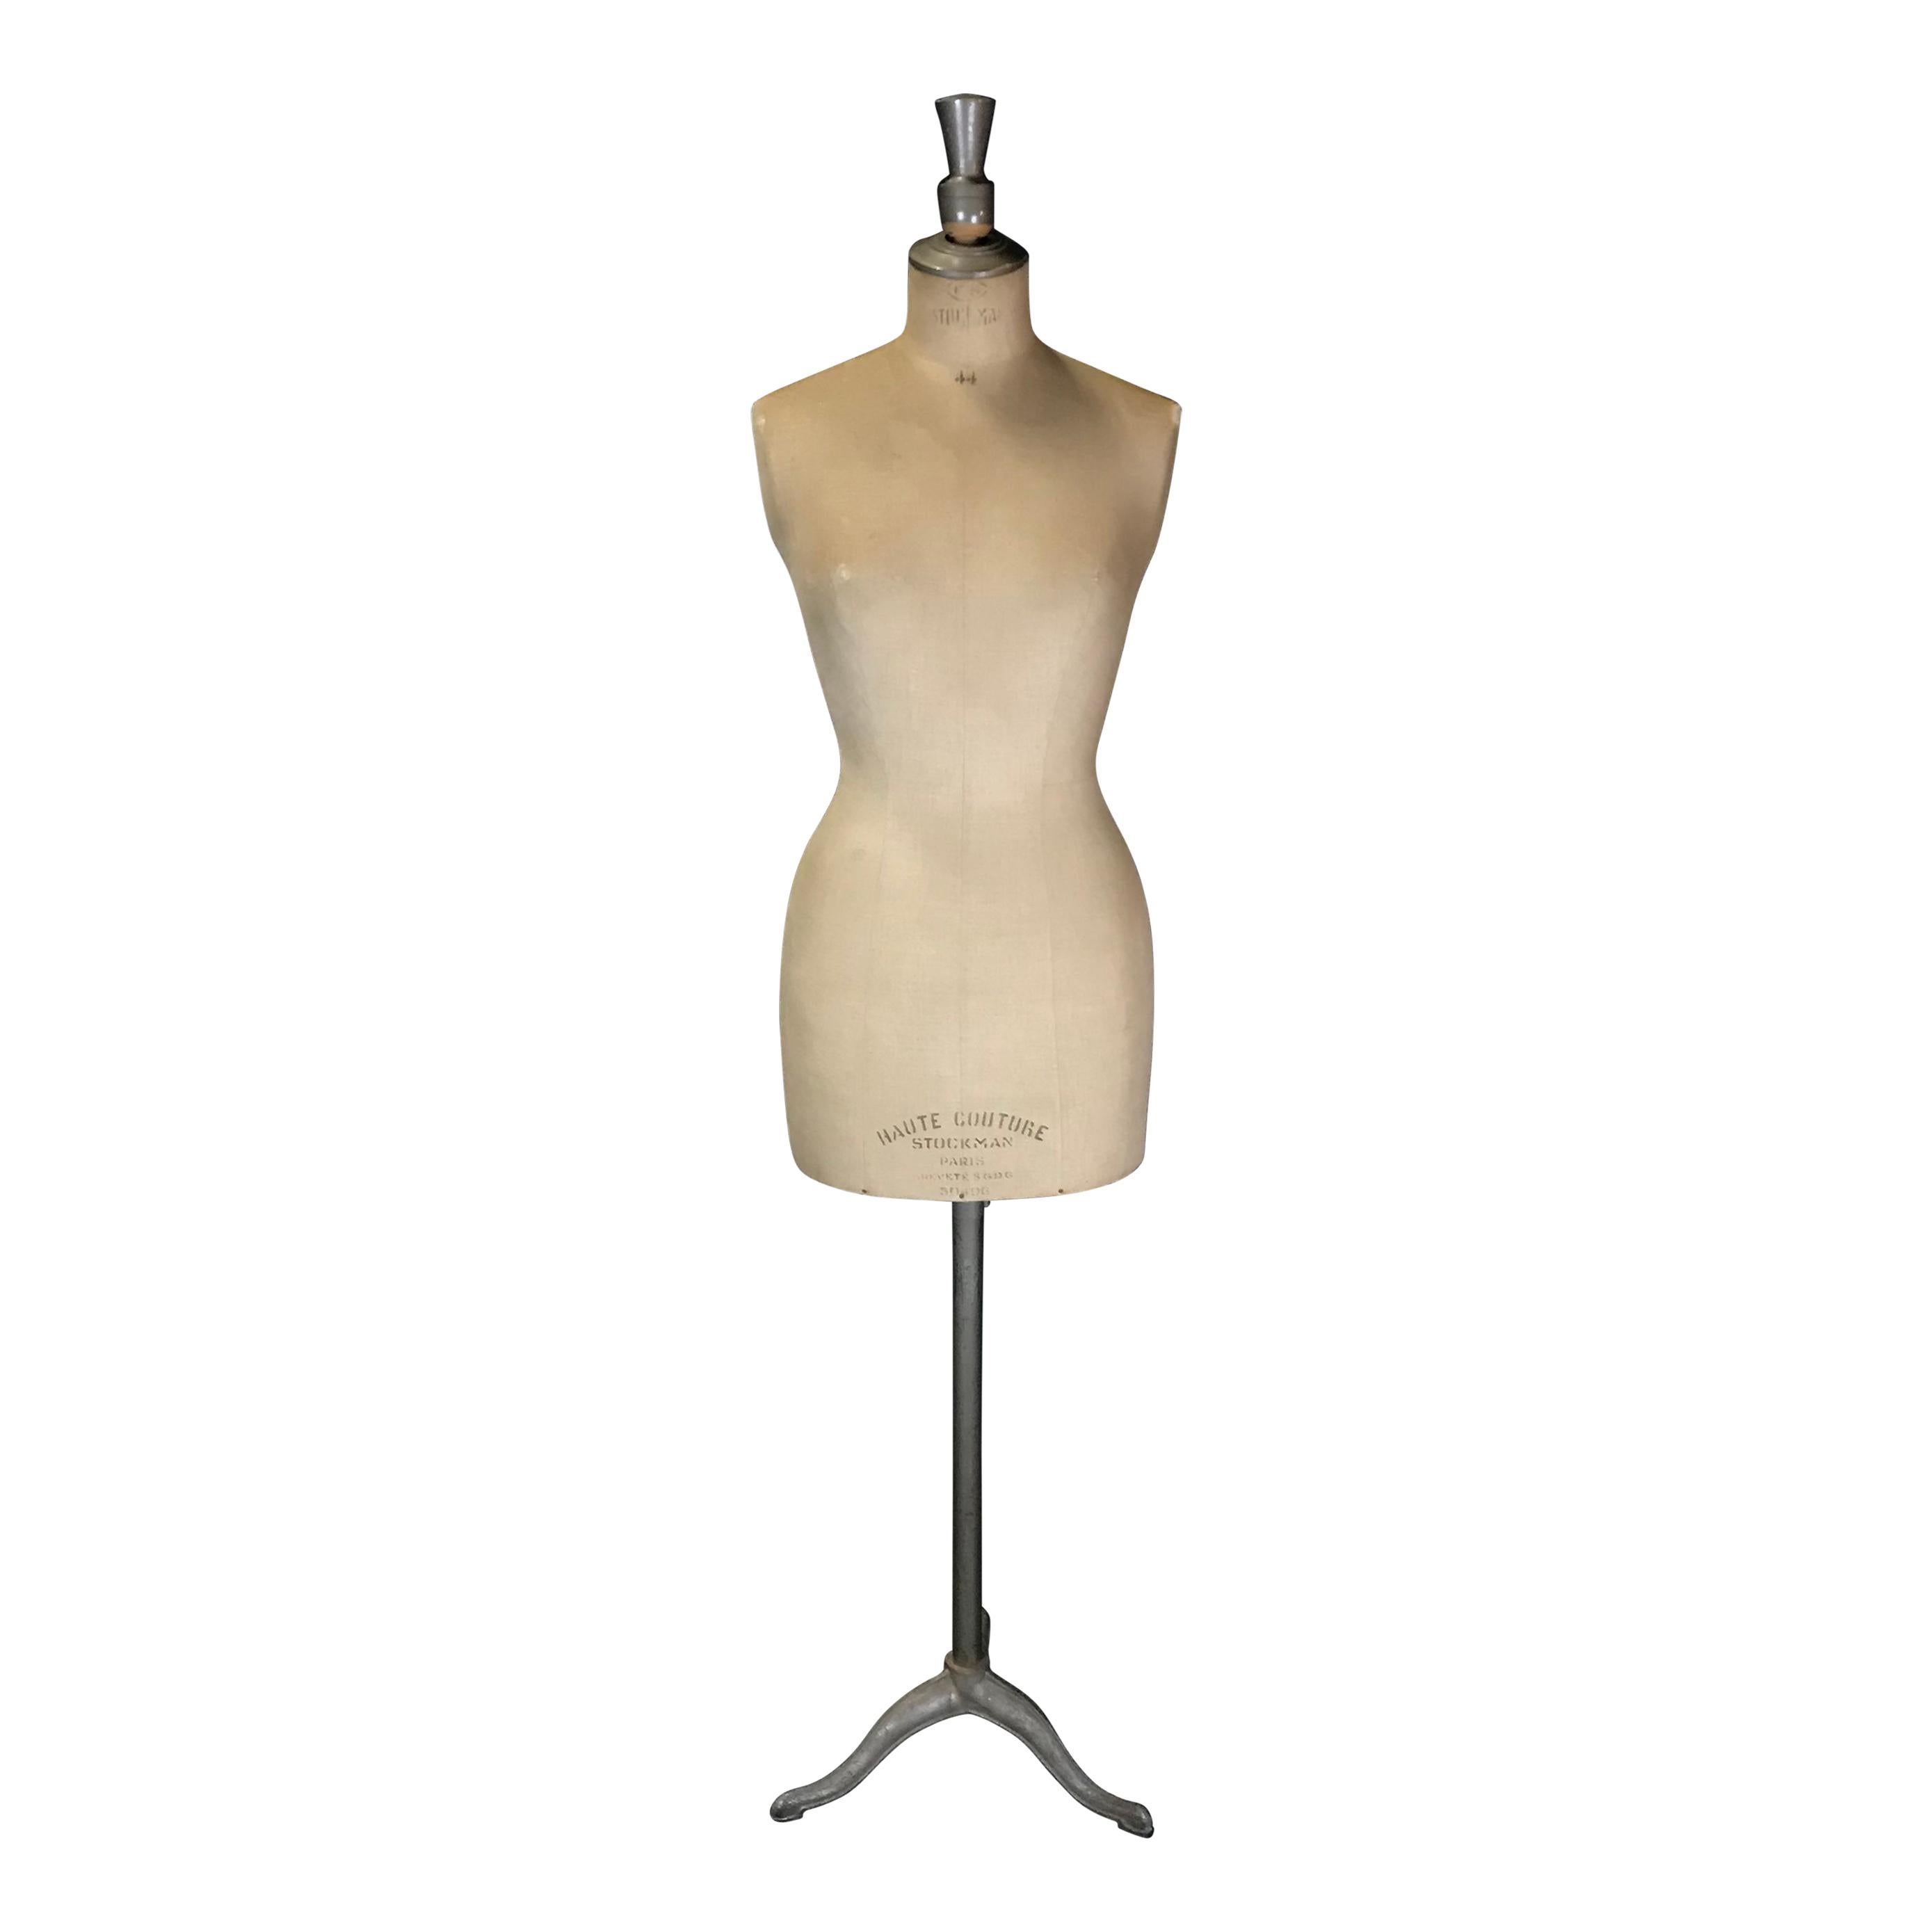 Haute Couture Mannequin - 3 For Sale on 1stDibs | mannequin haute couture, mannequin  couture